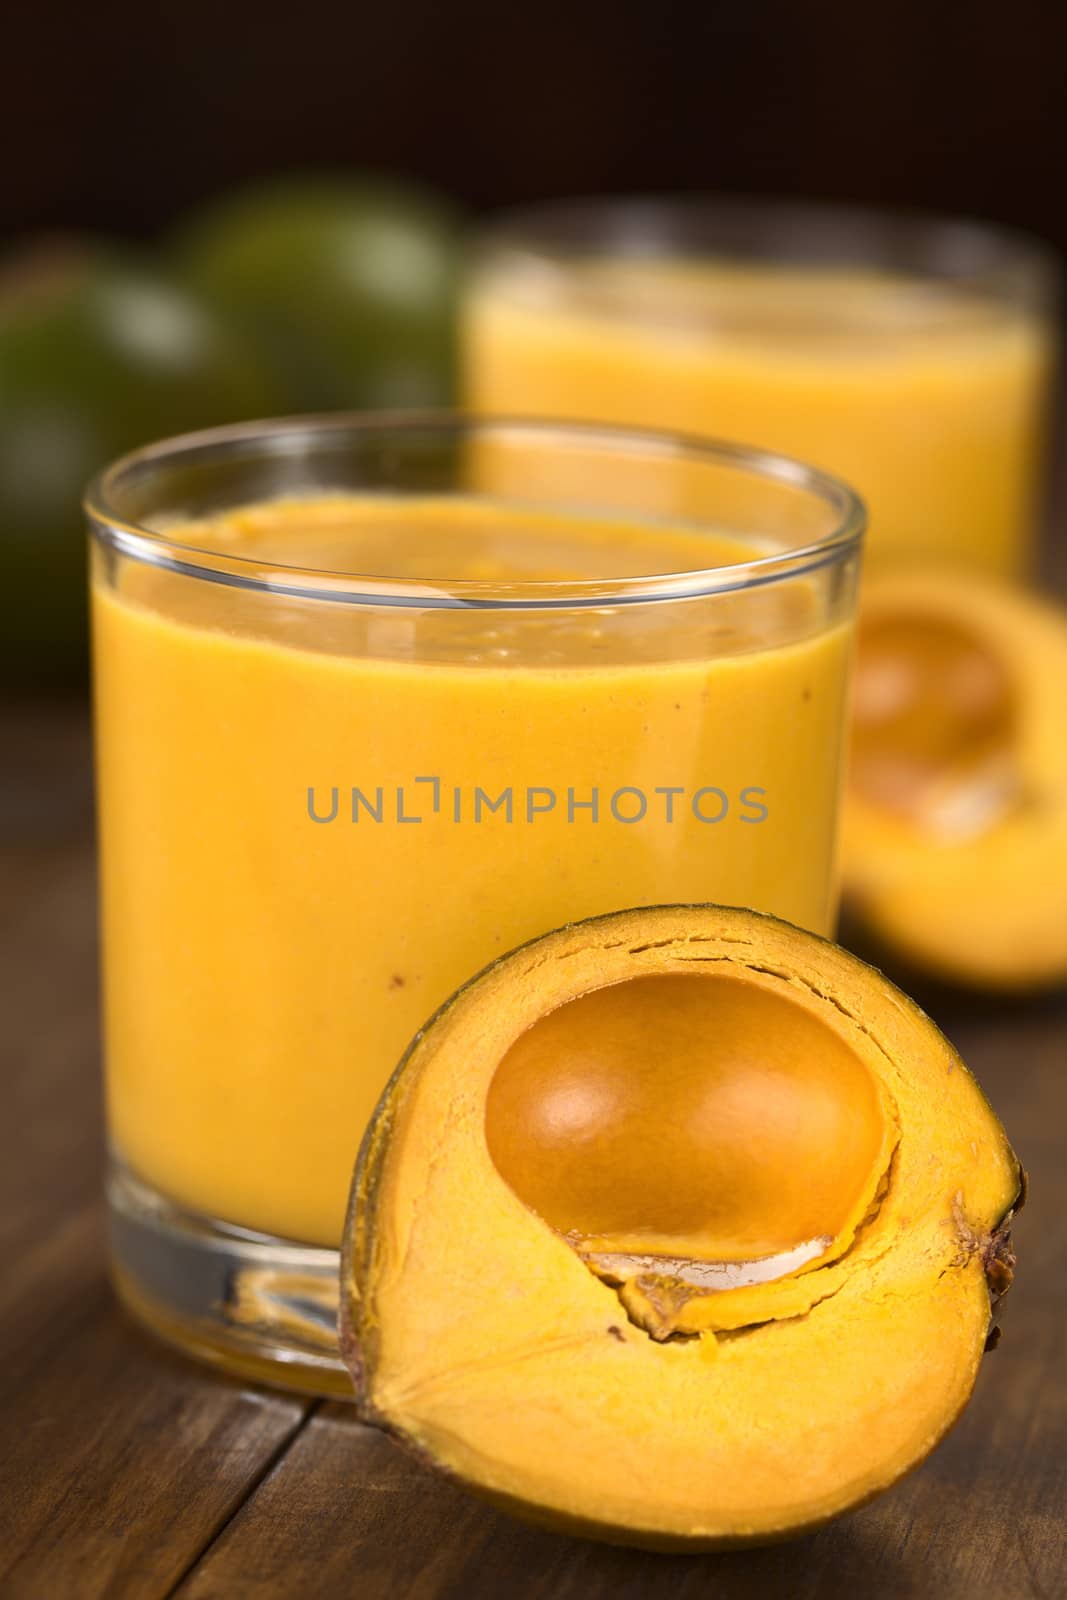 Milkshake made of the Peruvian fruit called lucuma (lat. Pouteria lucuma) served in glass with lucuma fruits around (Selective Focus, Focus on the front of the glass rim and the upper part of the lucuma in the front) 